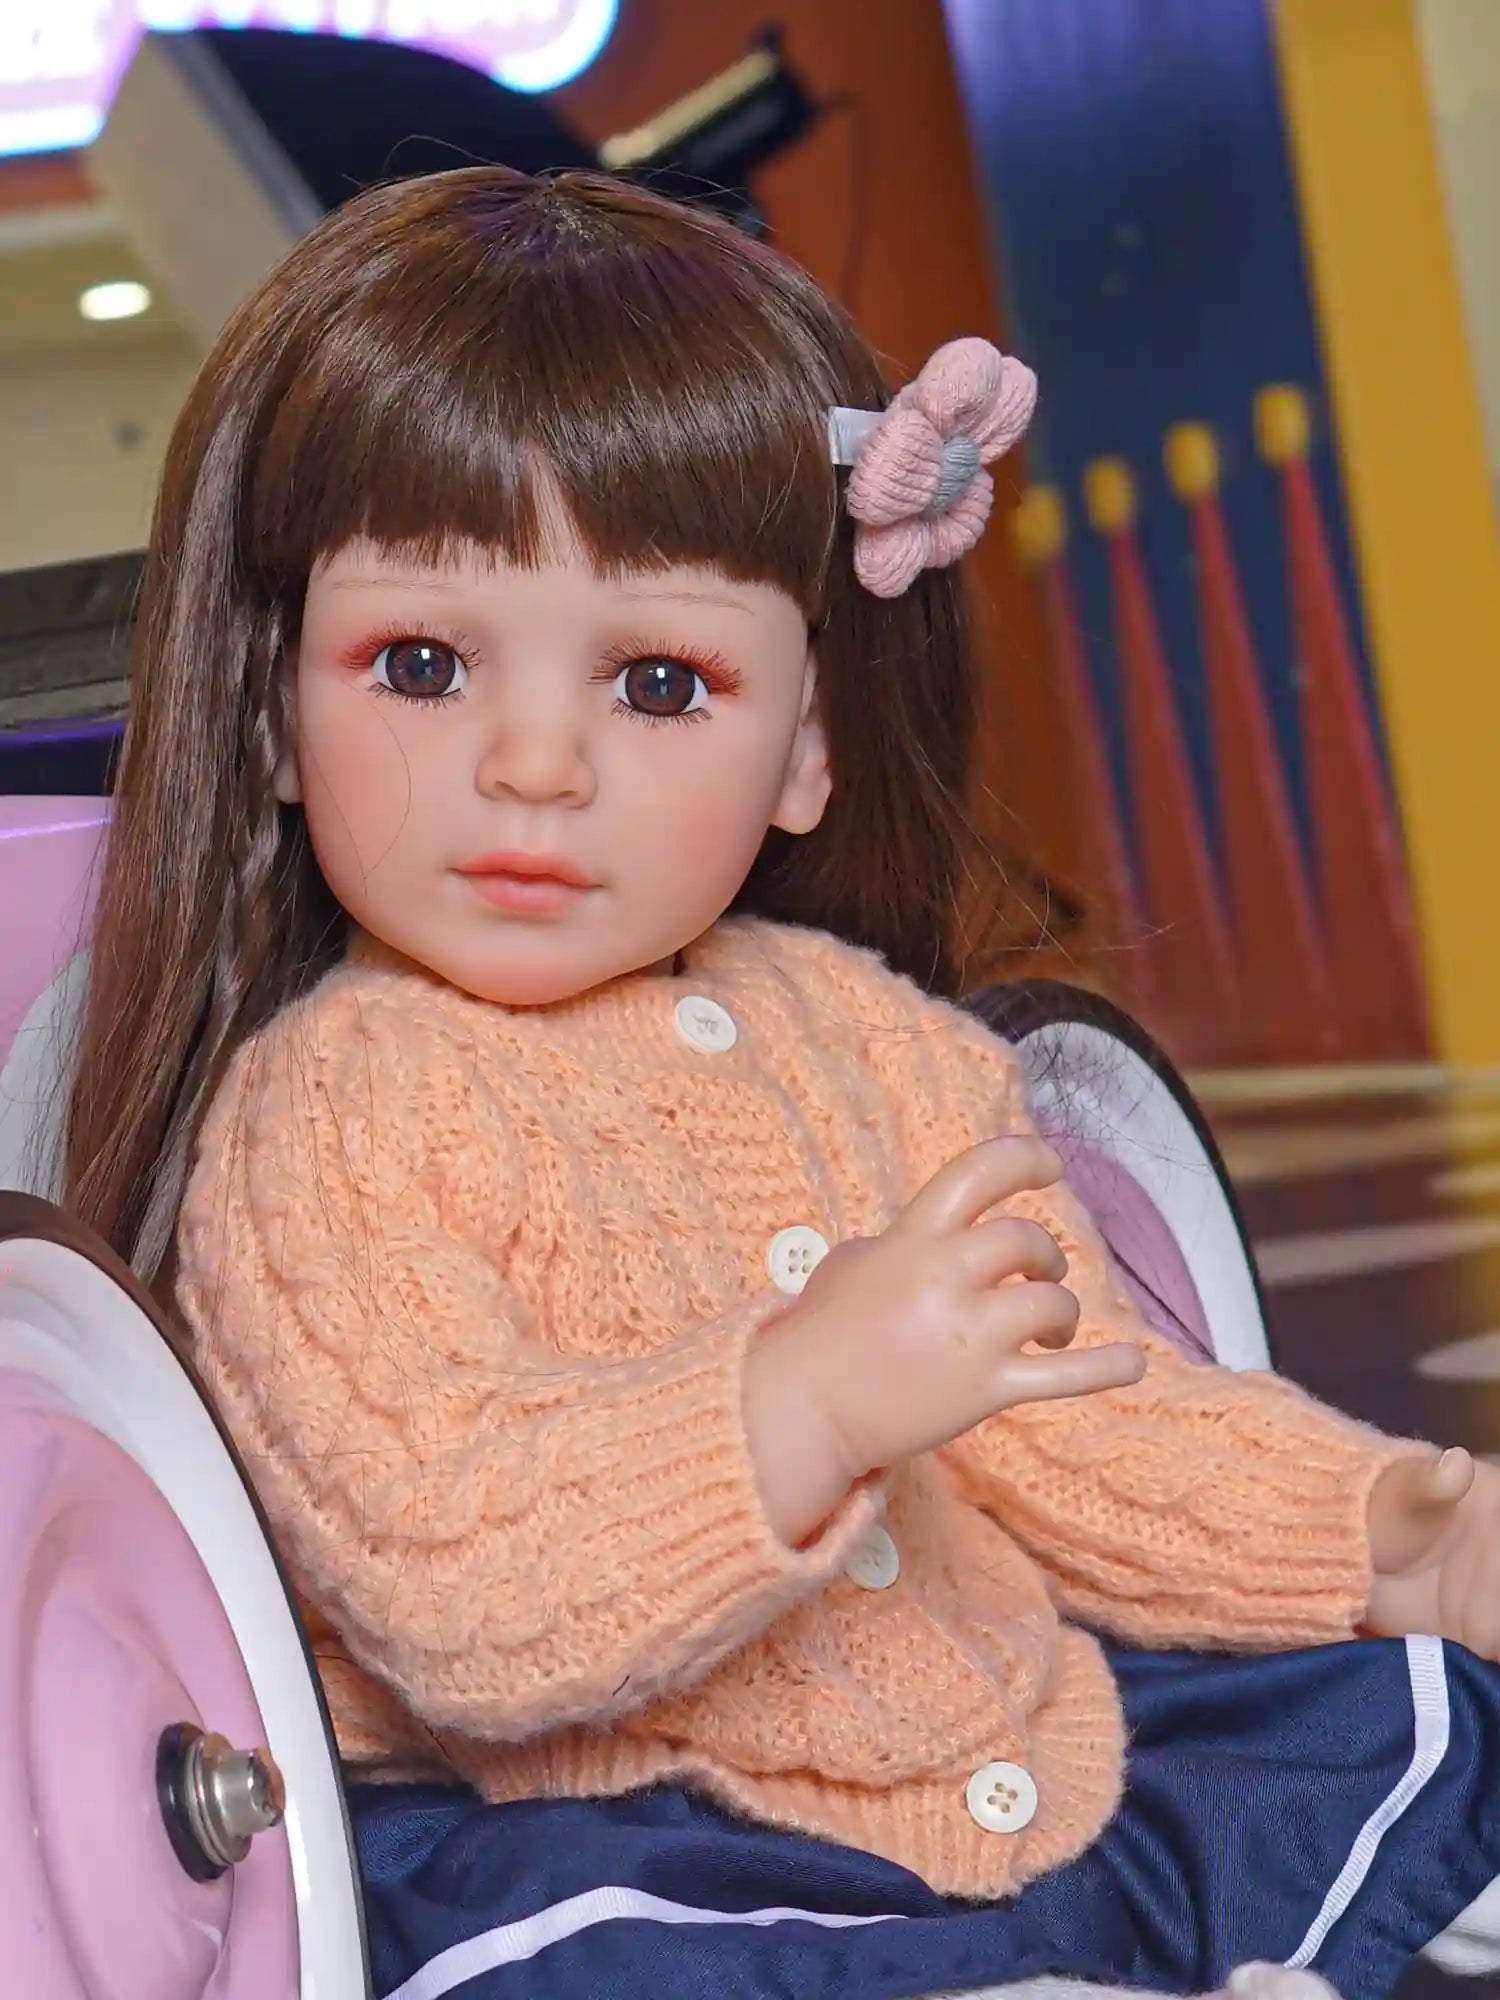 A realistic toddler doll, positioned seated with one hand raised, in casual attire against a playful backdrop.